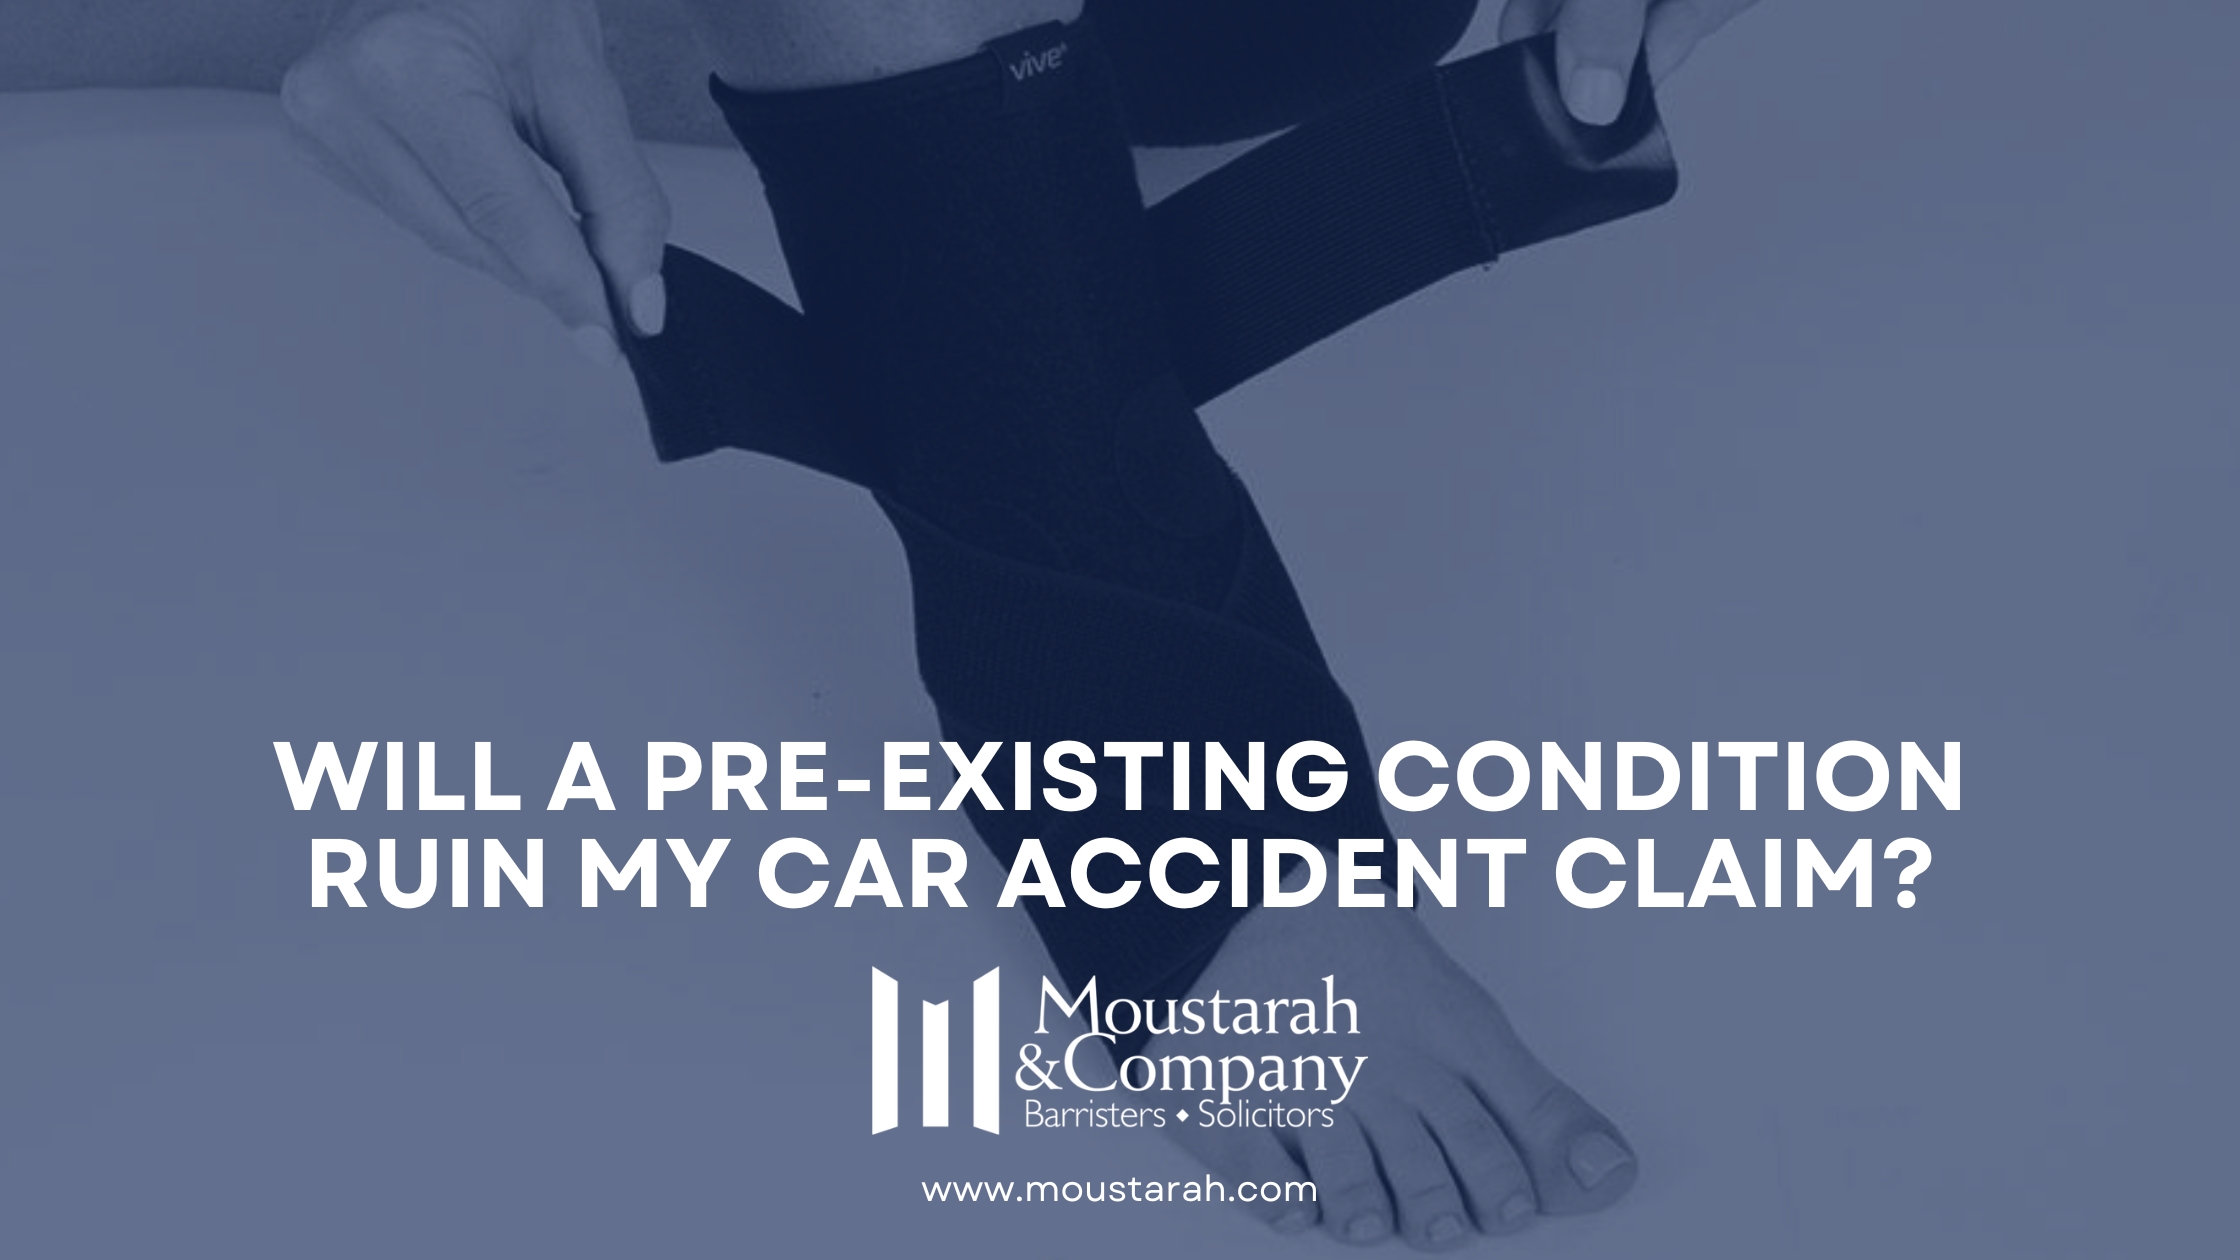 Car accident claims and preexisting conditions